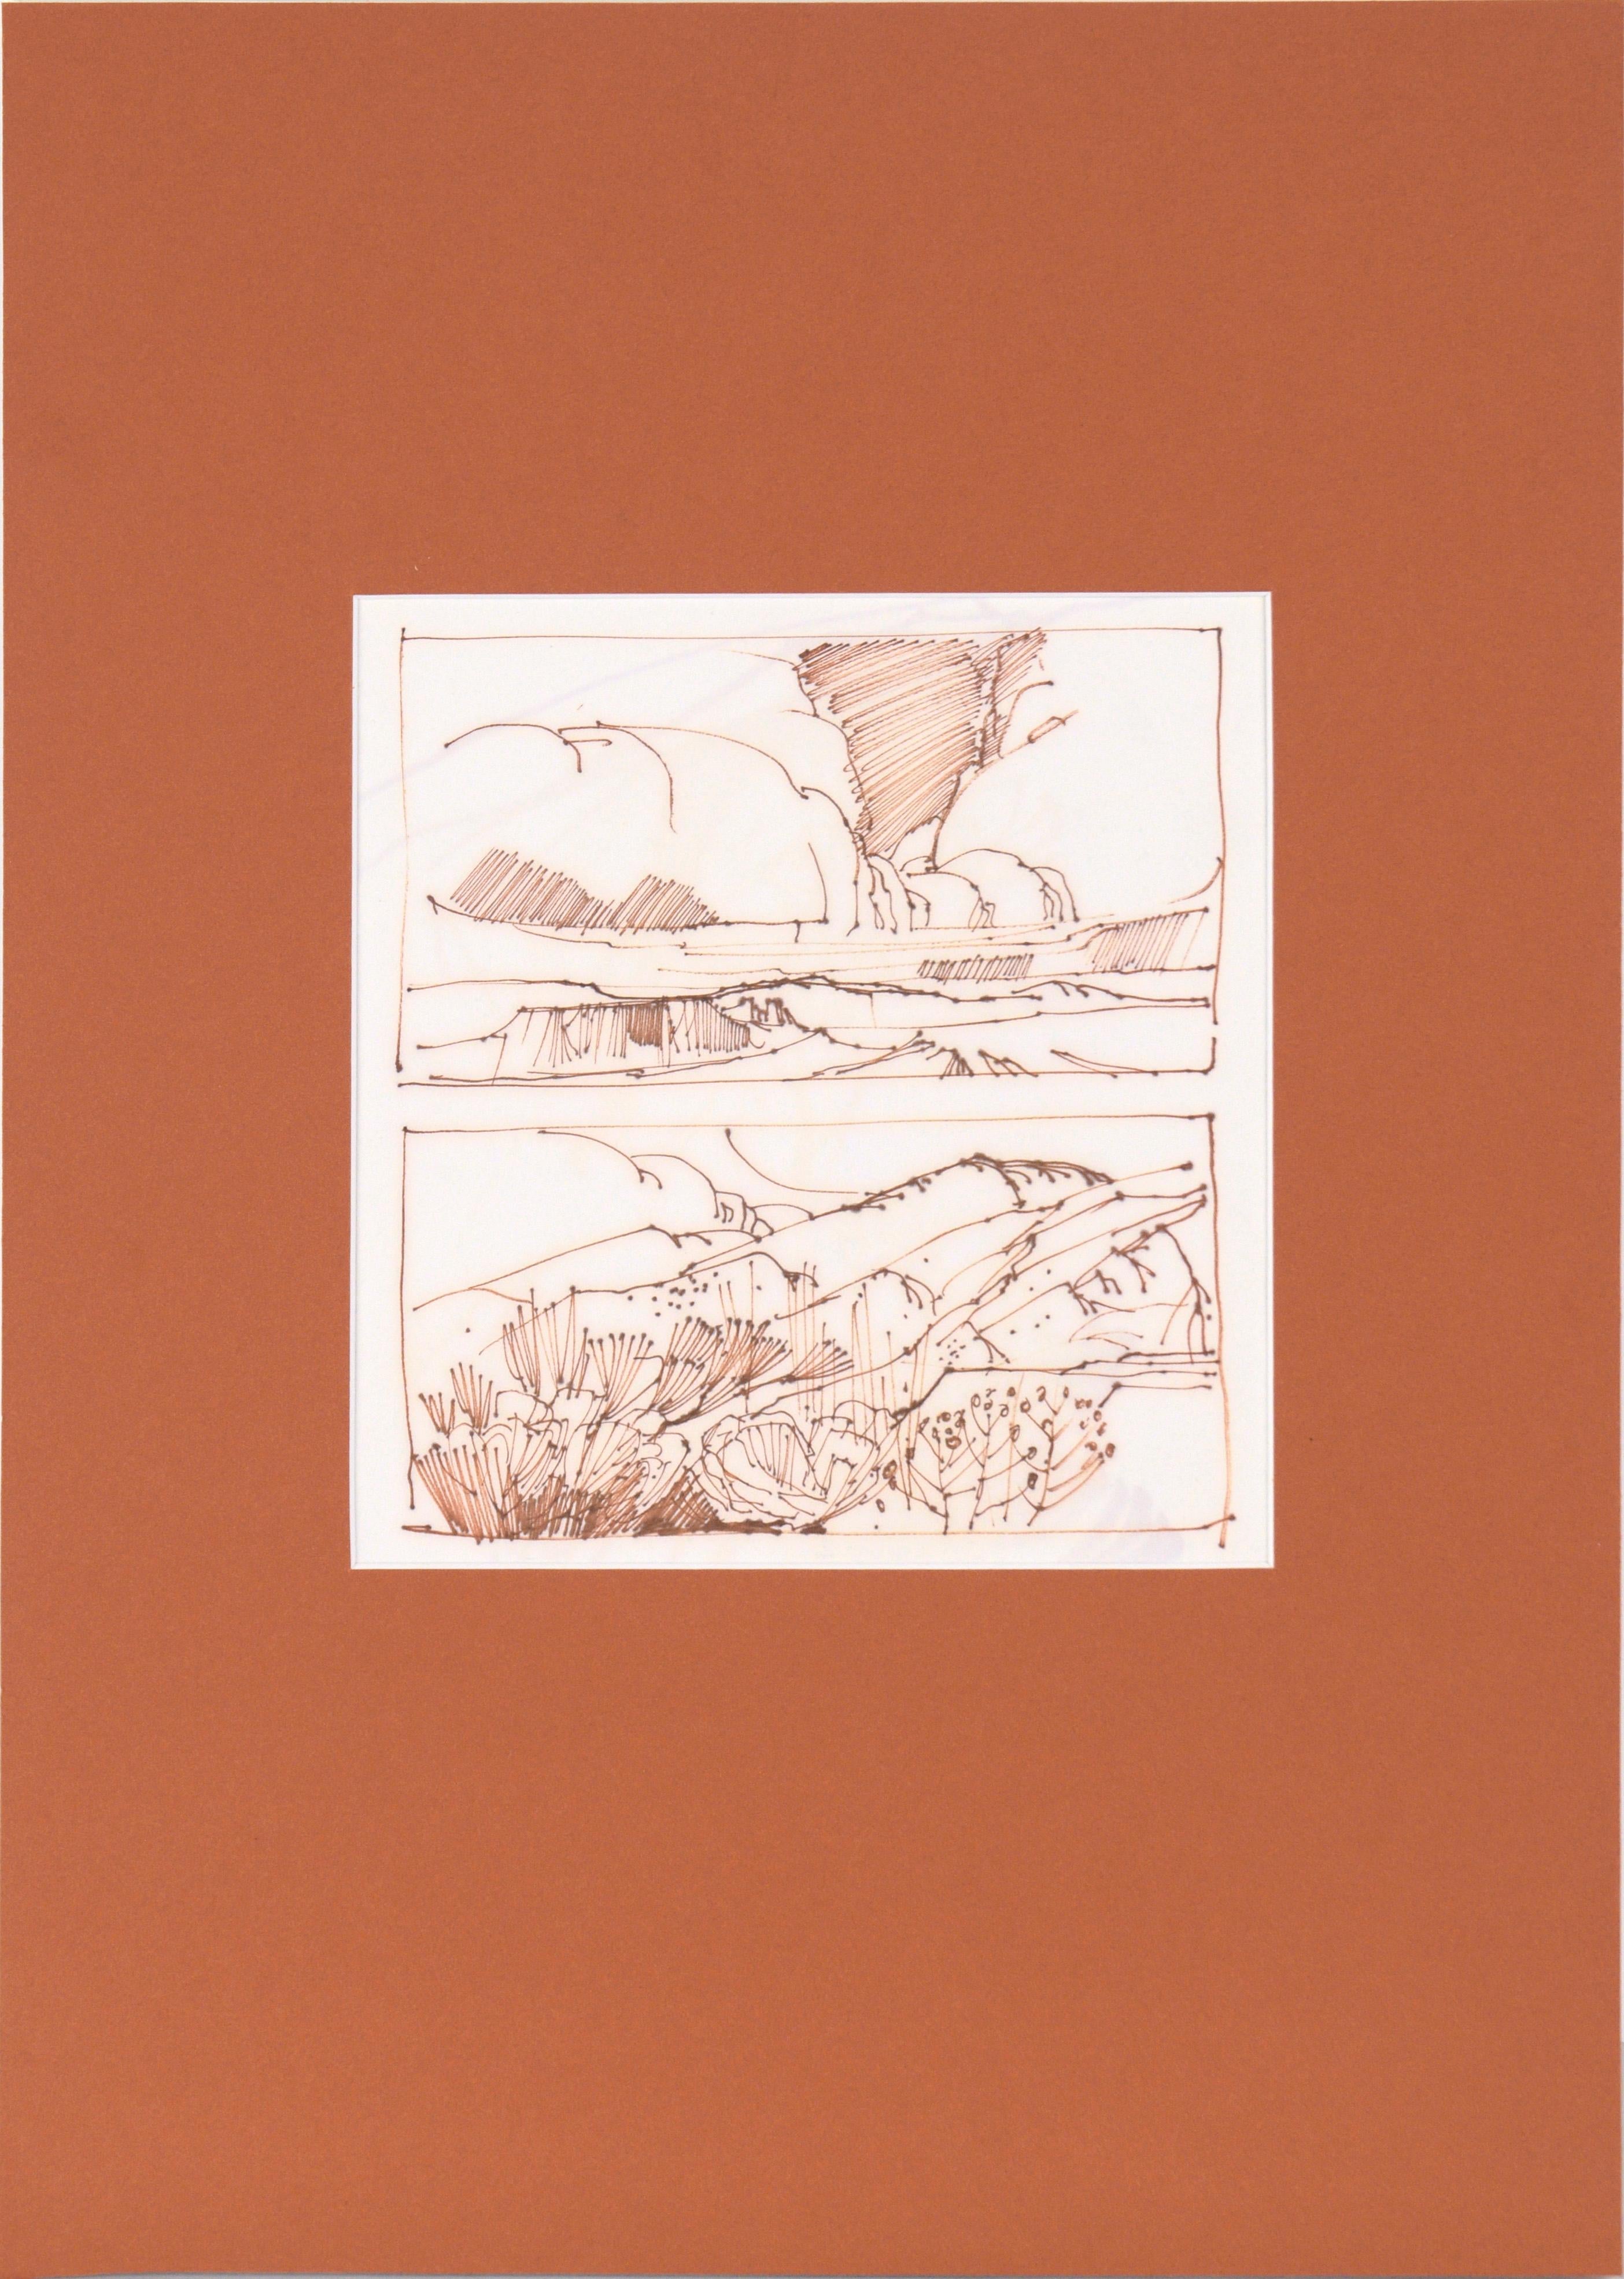 Laurence Sisson Landscape Art - Two High Desert Landscapes - Line Drawing in Sepia-Toned Ink on Paper